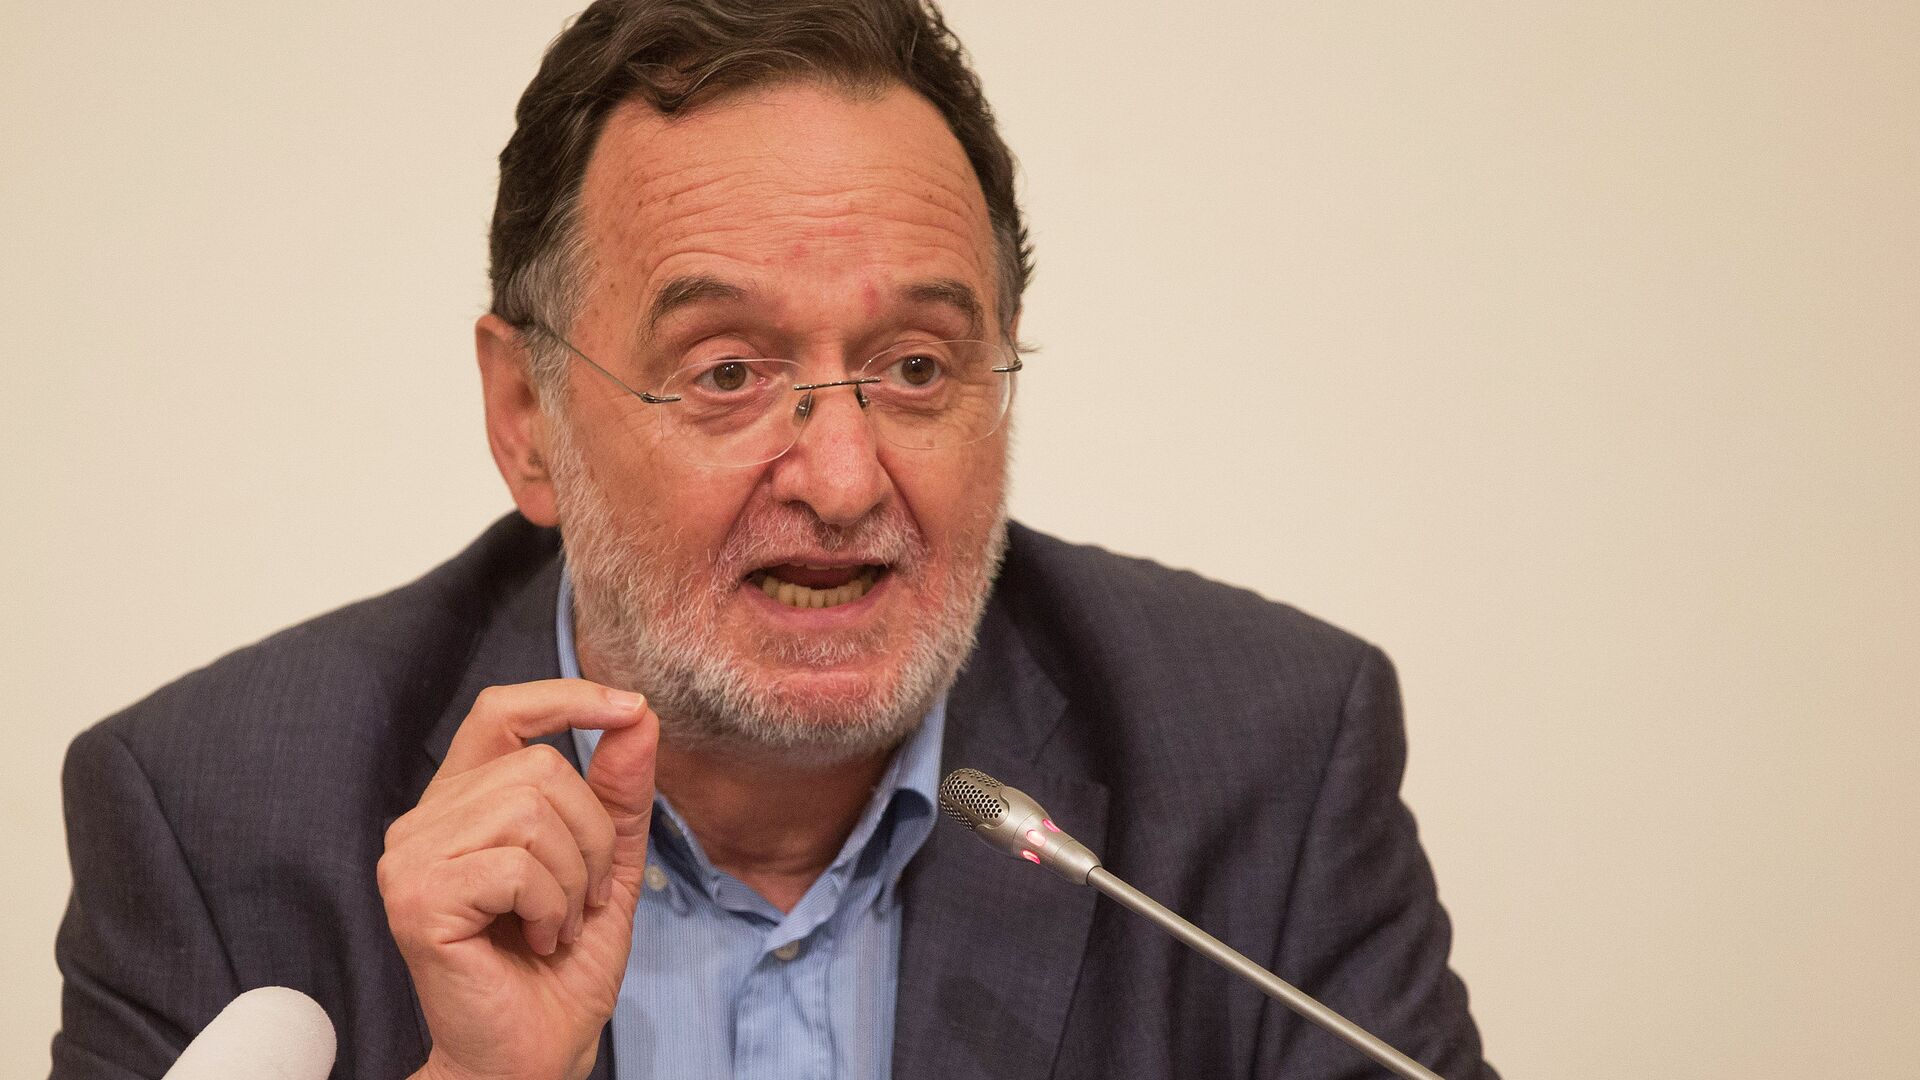 Former Energy Minister Panagiotis Lafazanis announces the formation of a new hardline left wing party called Popular Unity which he will lead, during press conference in Athens, on Friday, Aug. 21, 2015 - Sputnik International, 1920, 24.07.2022